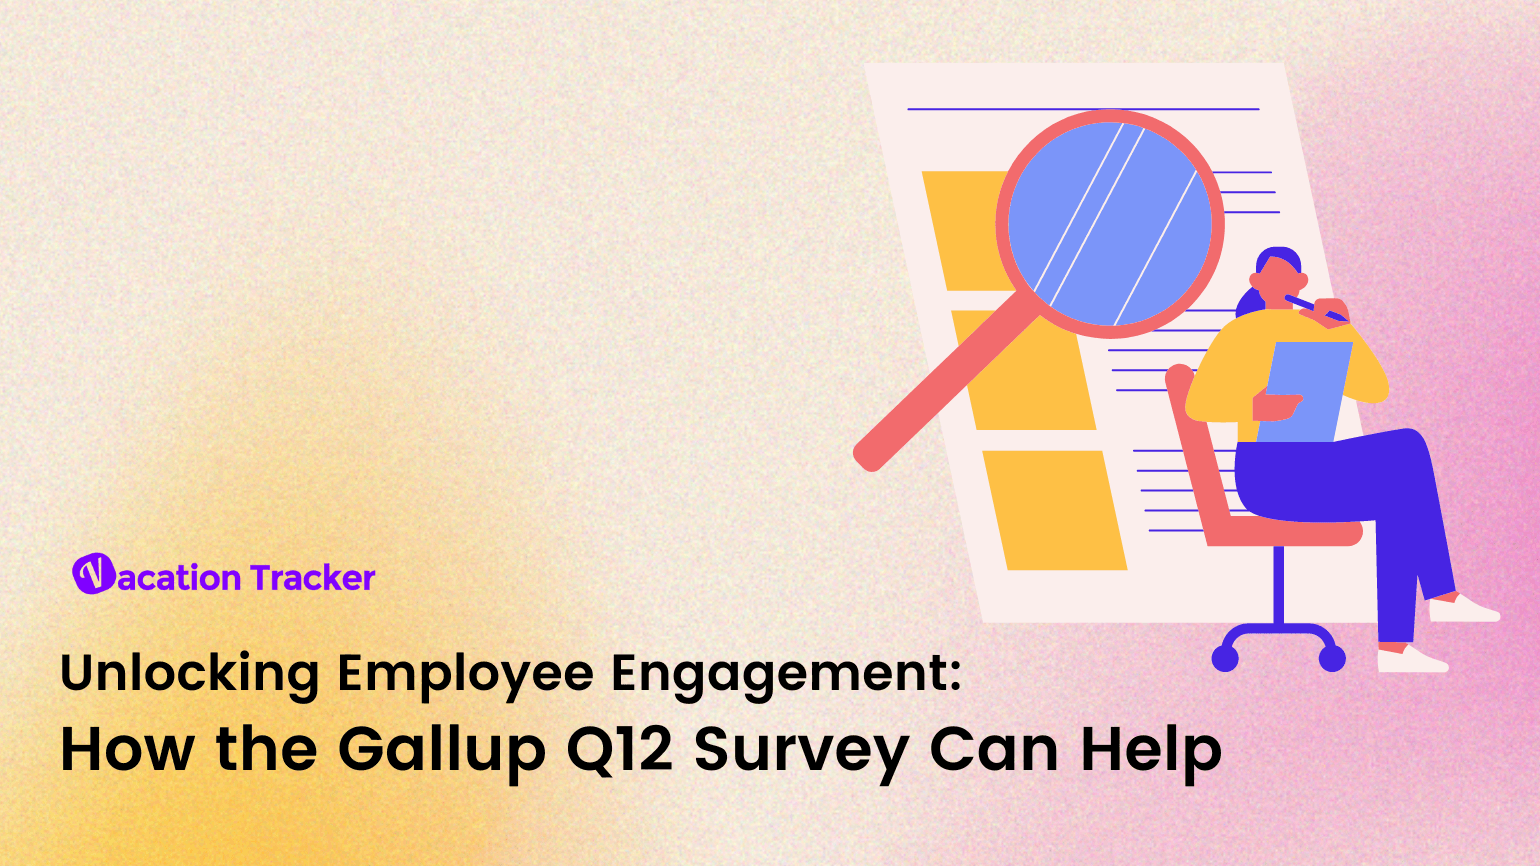 Unlocking Employee Engagement: How the Gallup Q12 Survey Can Help